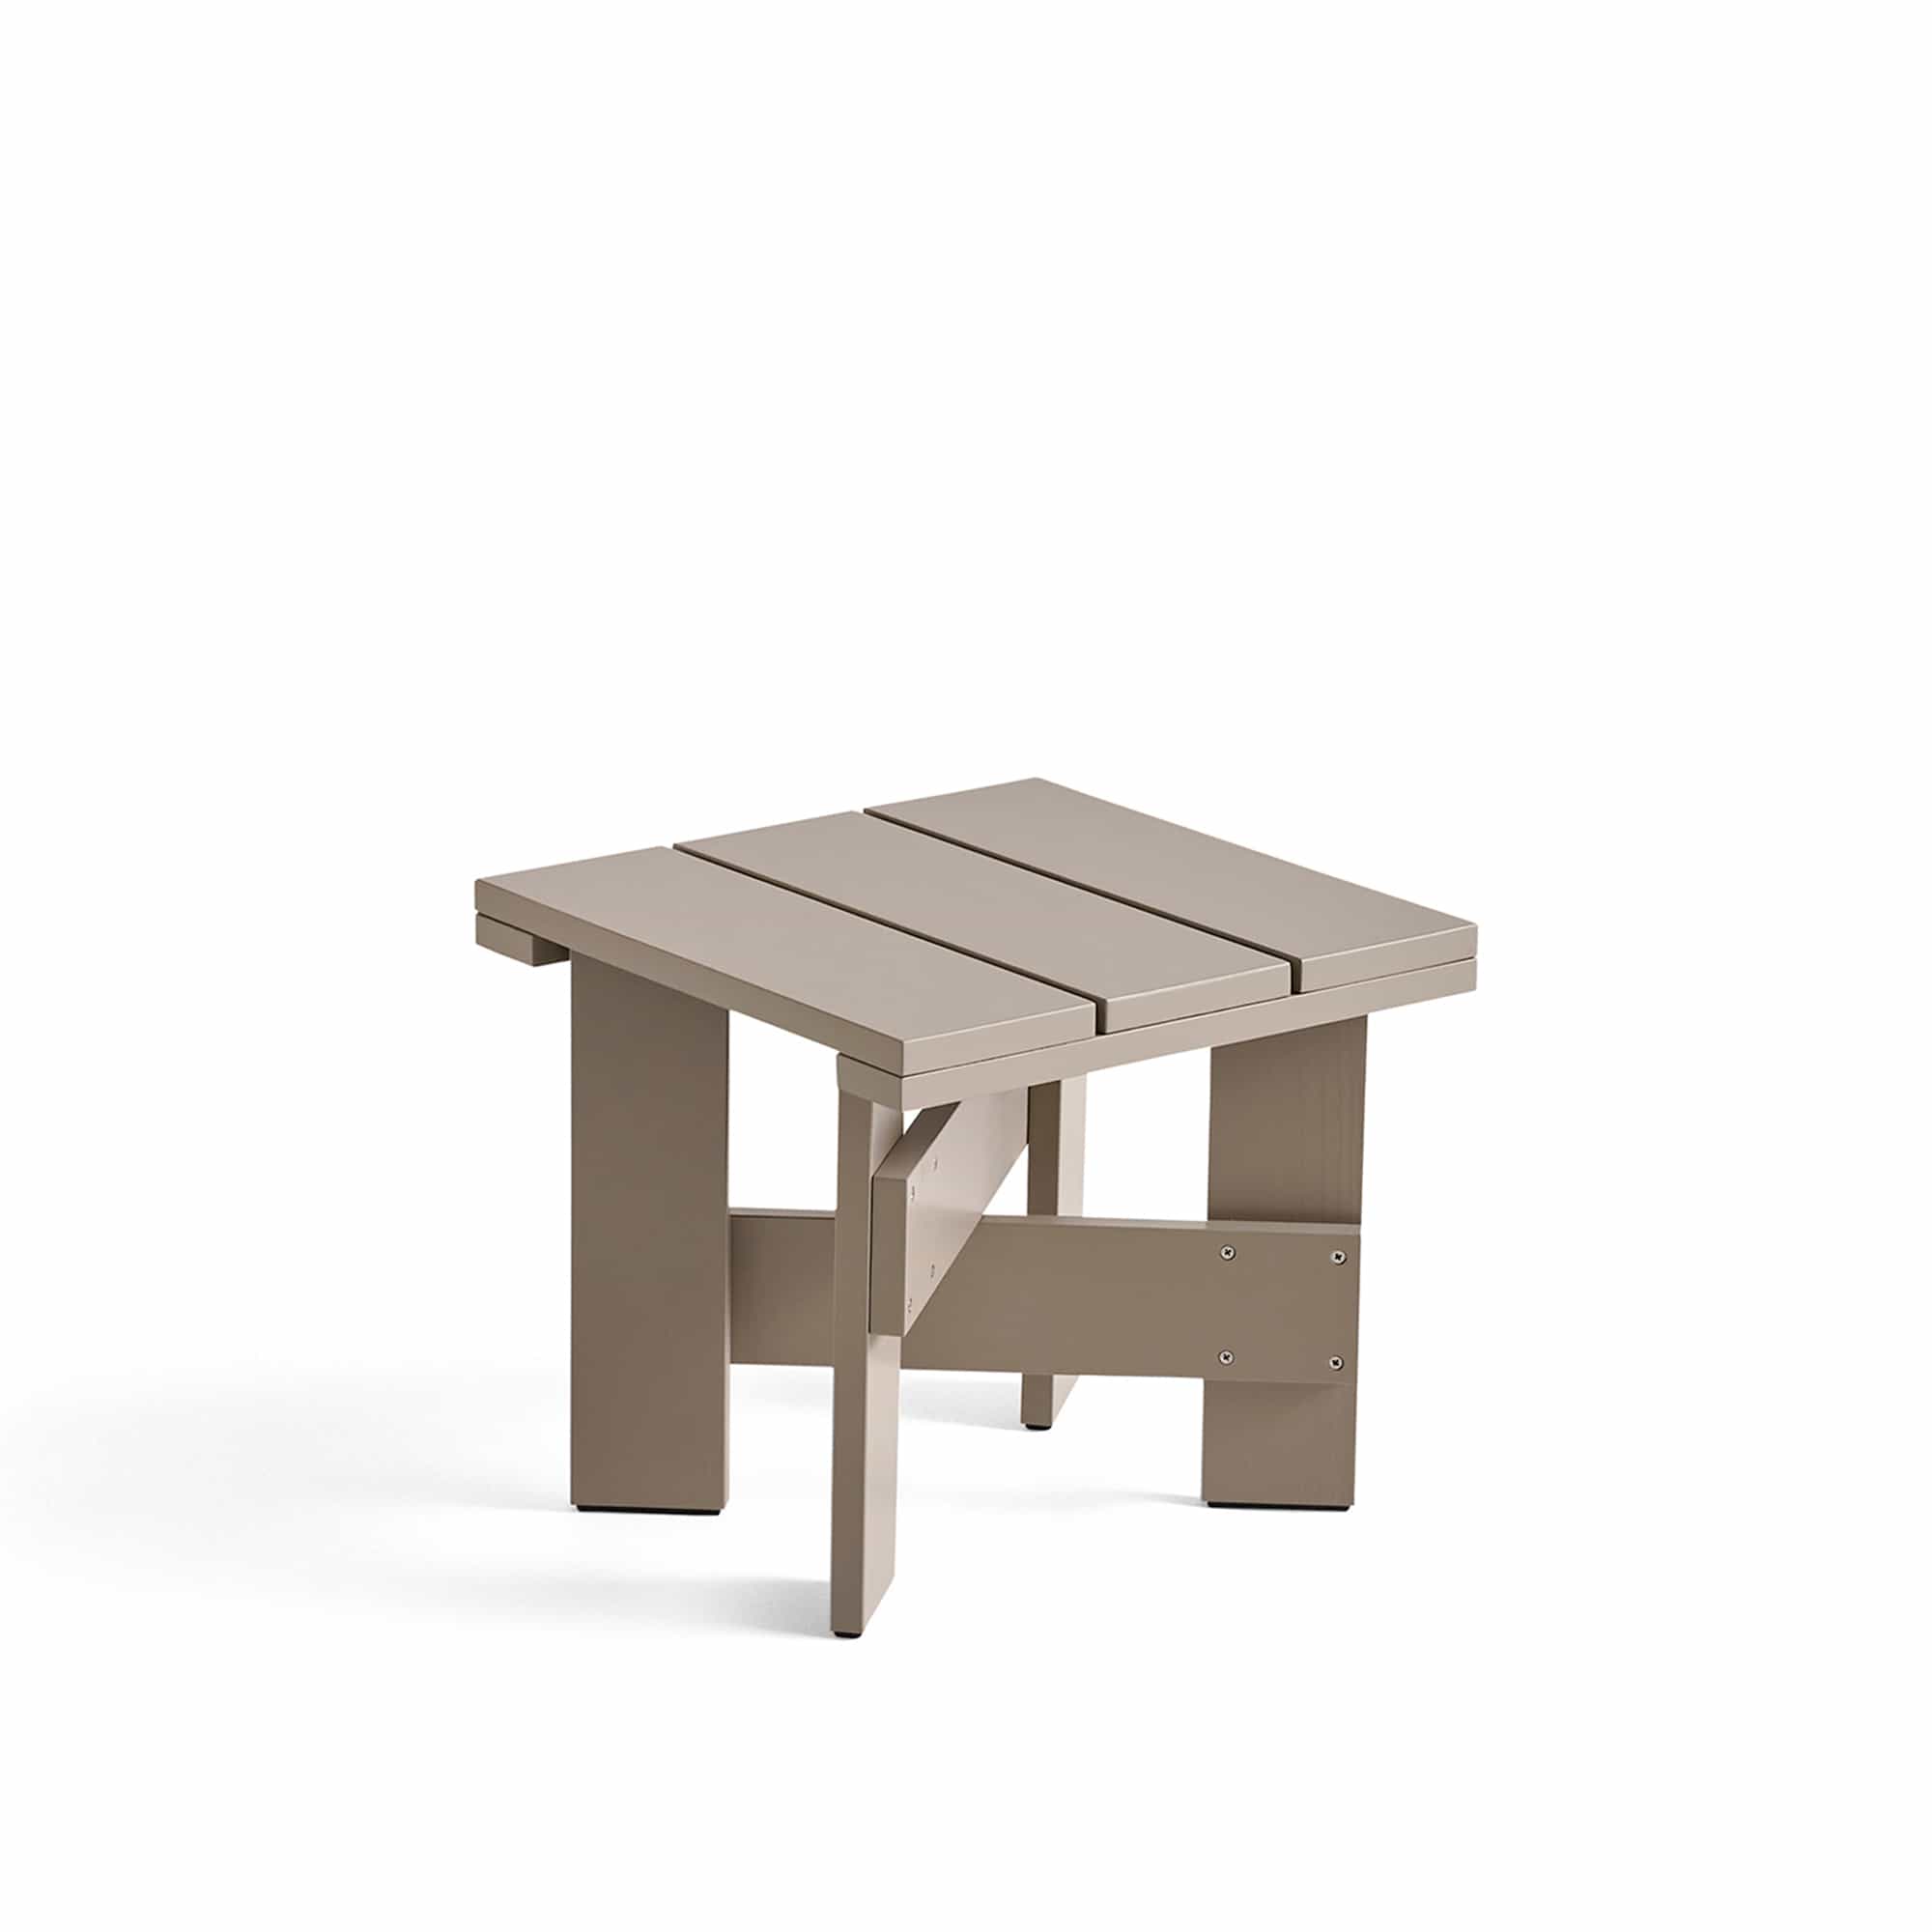 Crate Low Table 45 x 45 cm